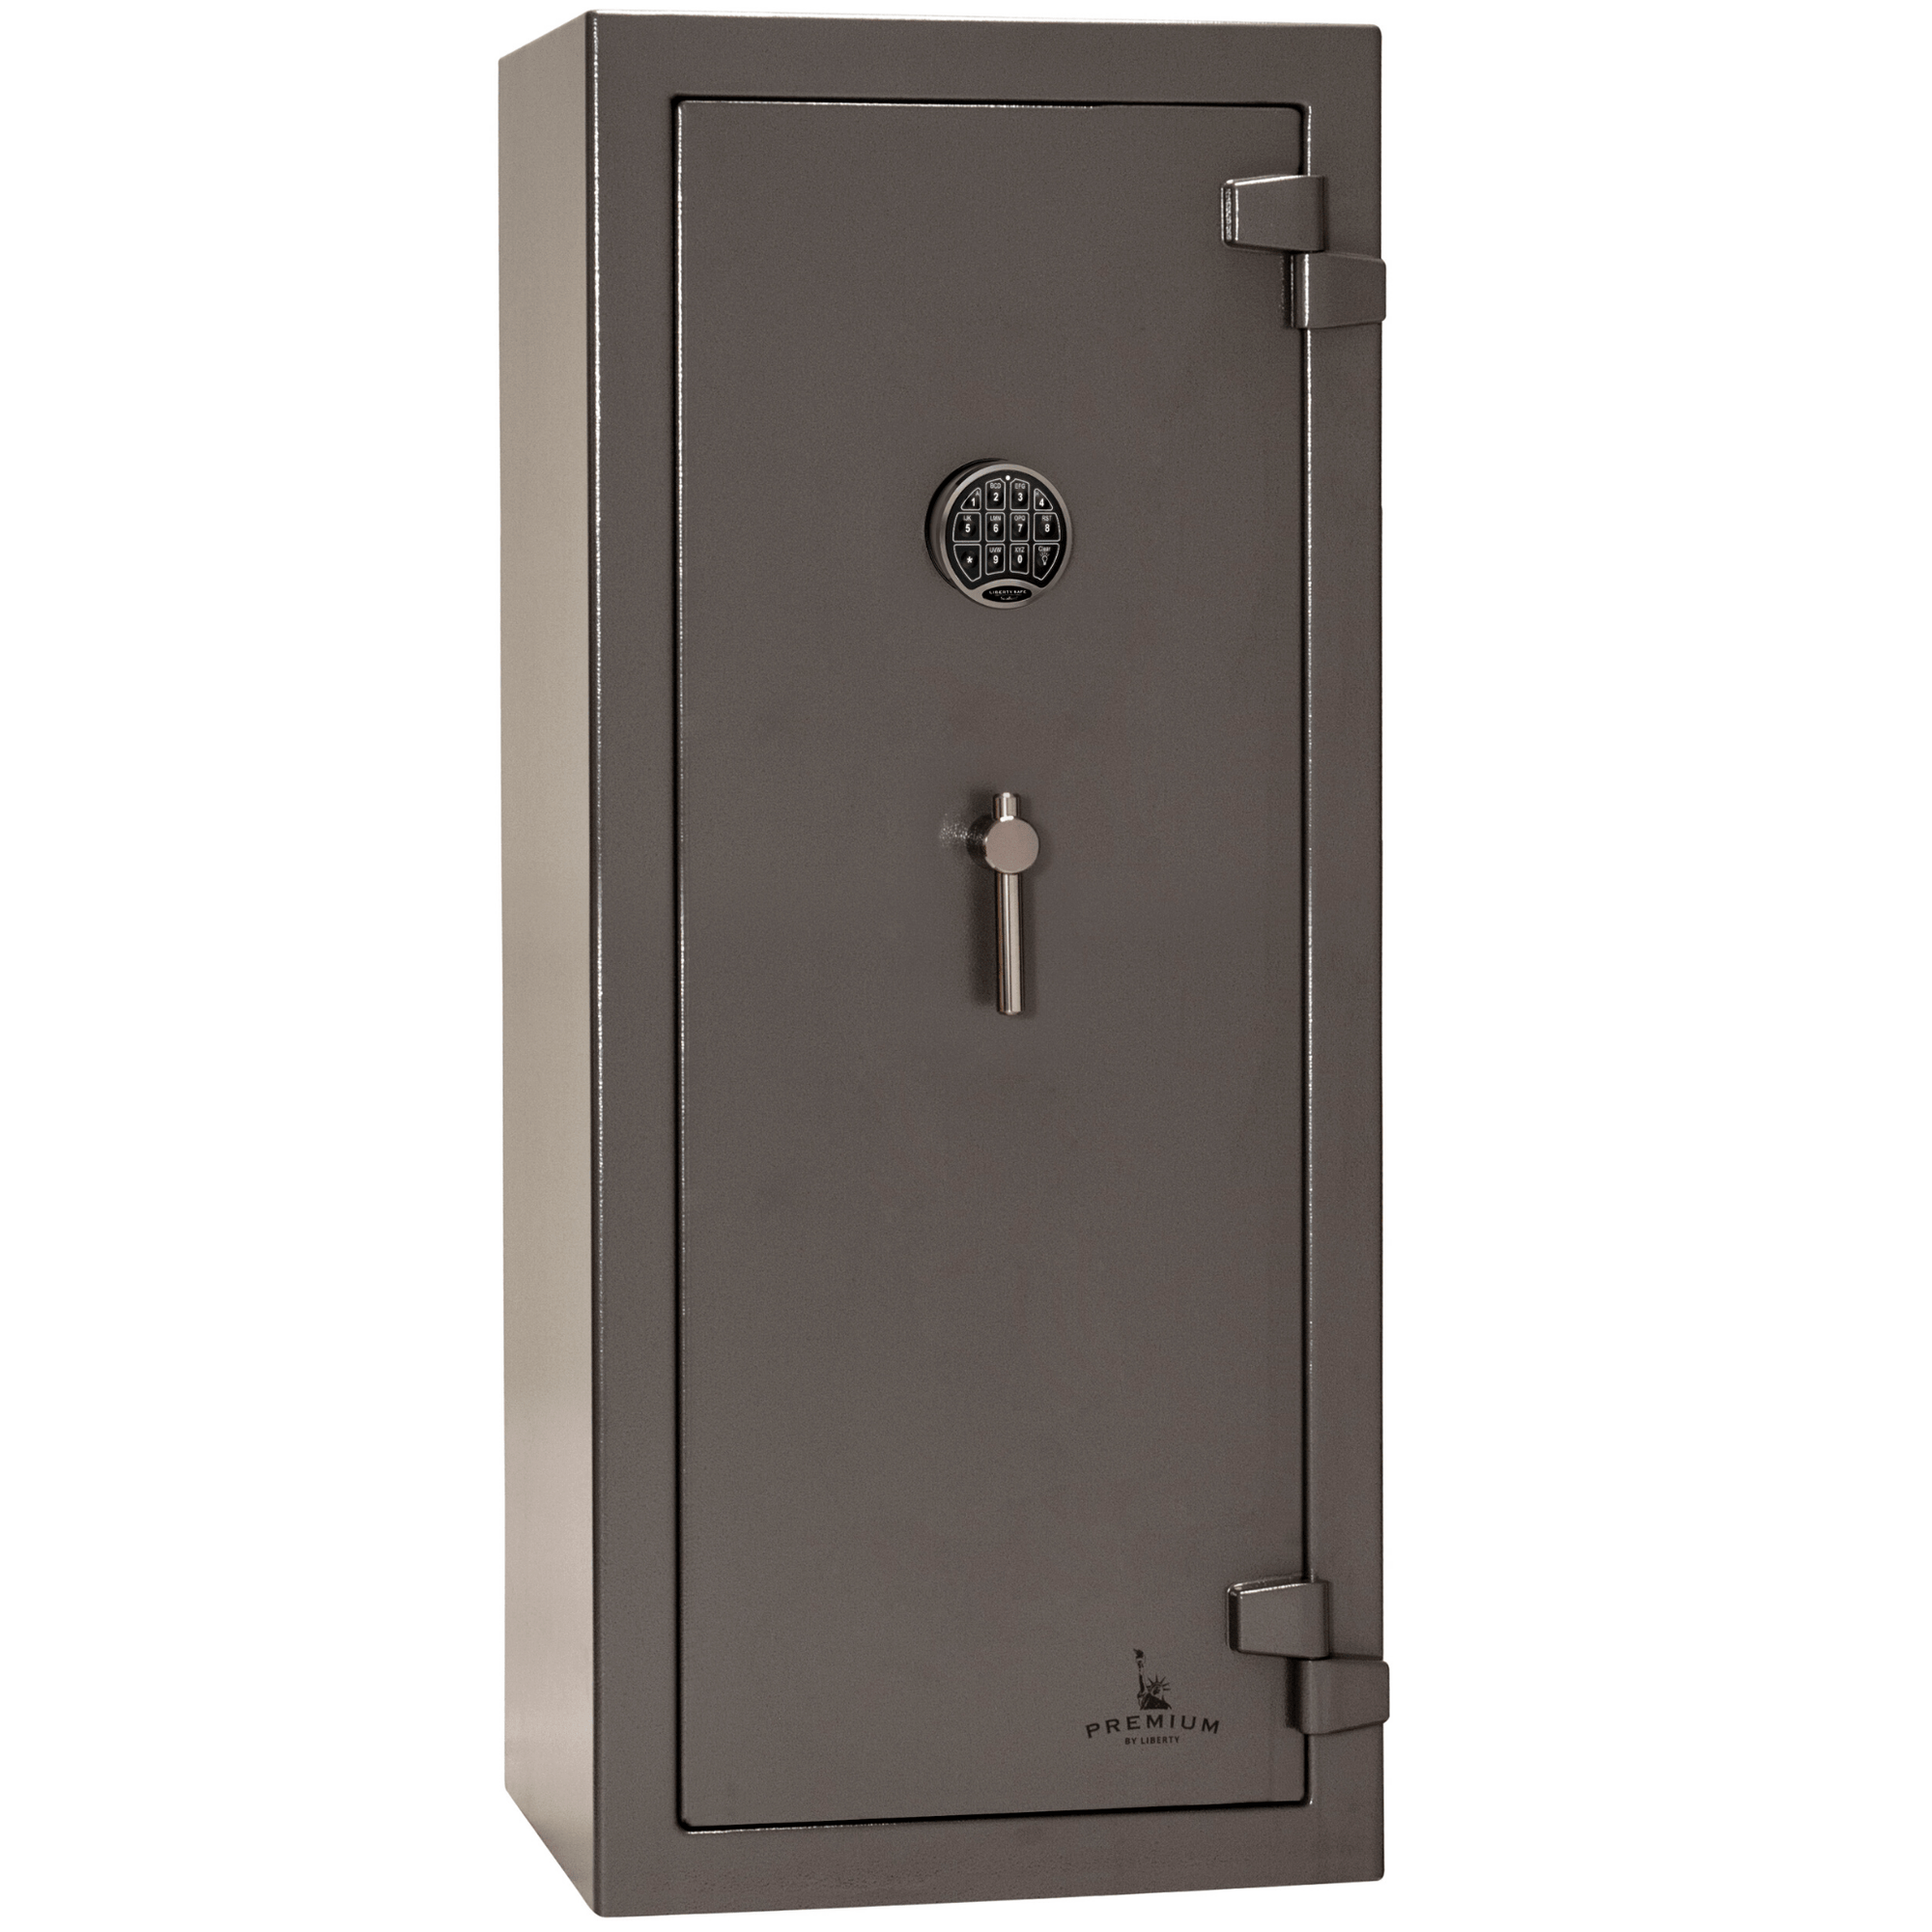 Premium Home | 17 | 90 Minute Fire Protection | Gray | Electronic Lock | Dimensions: 59"(H) x 24"(W) x 22.5"(D) | Liberty Safe Norcal.